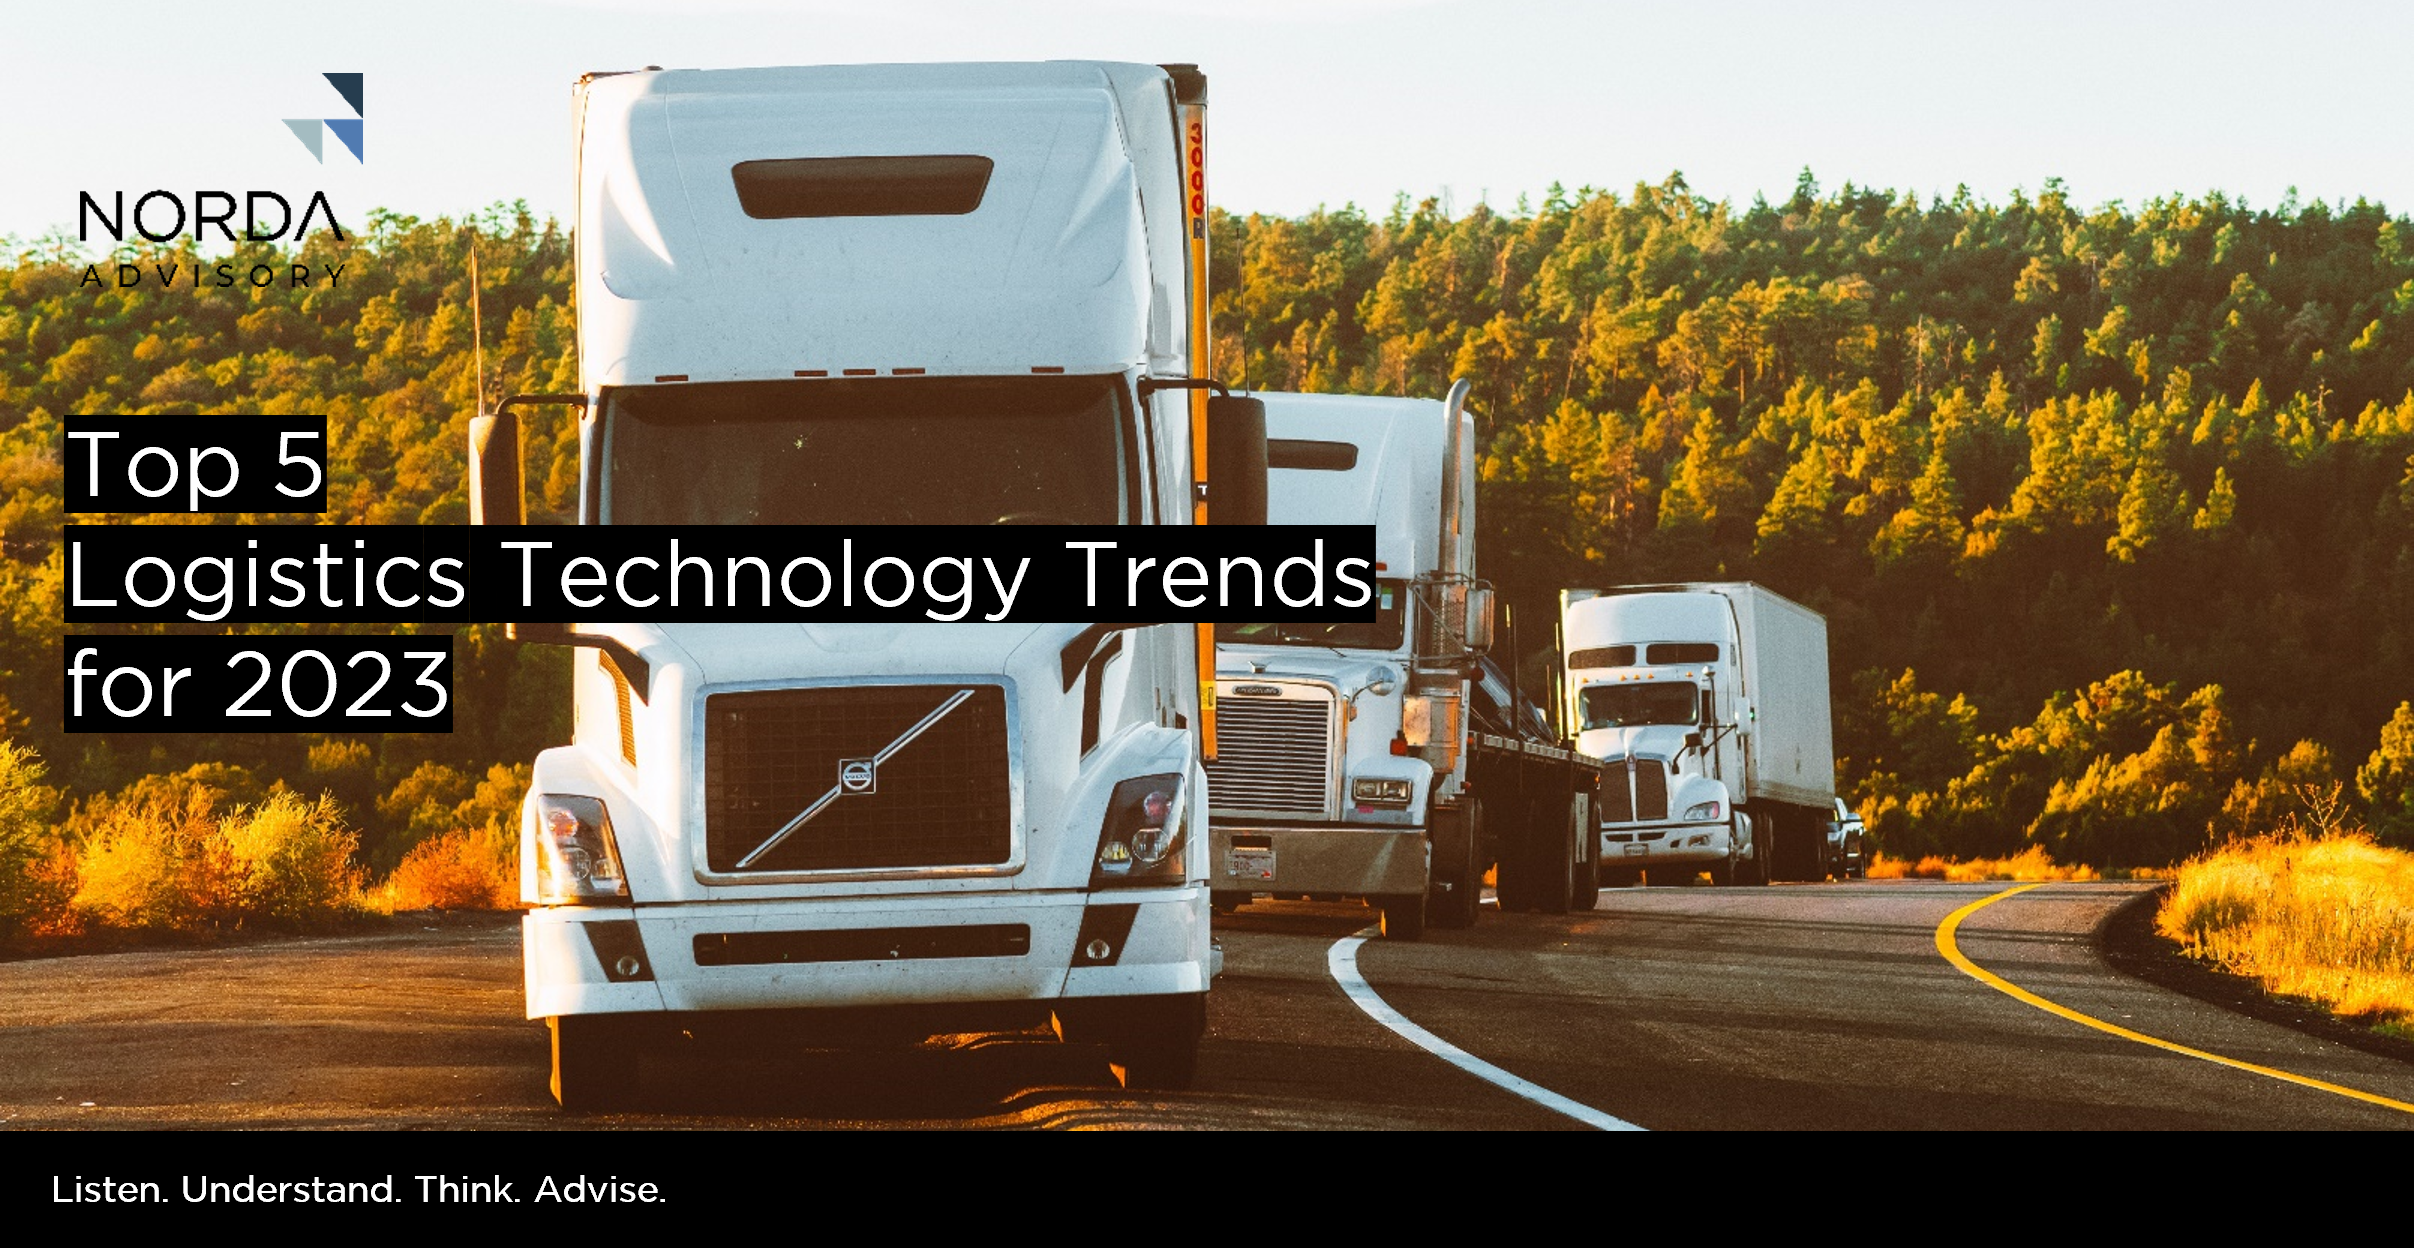 Top 5 Logistics Technology Trends for 2023